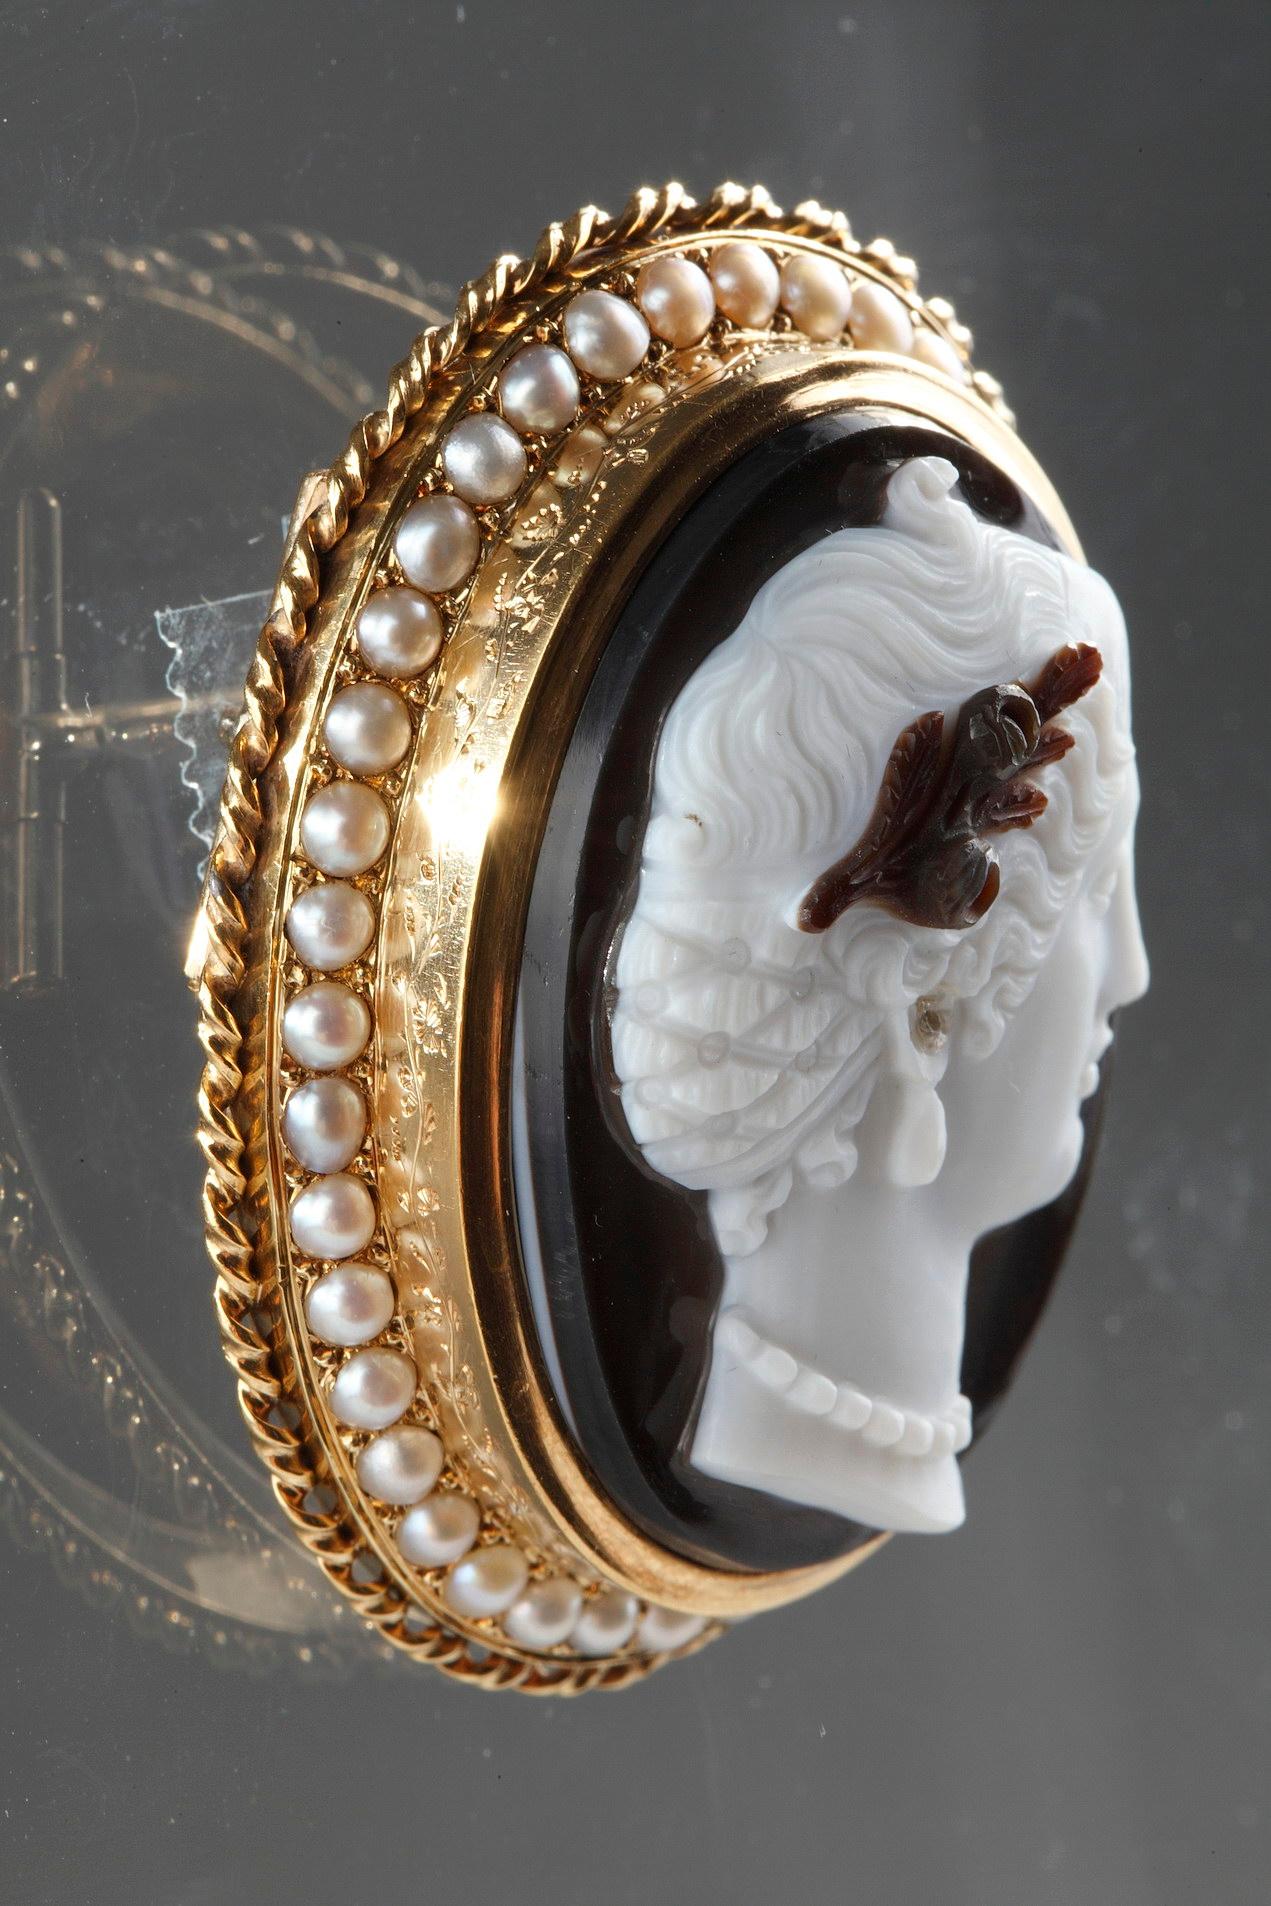 Gold-Mounted Agate Cameo Brooch, Second Part of the 19th Century, Napoleon III 3